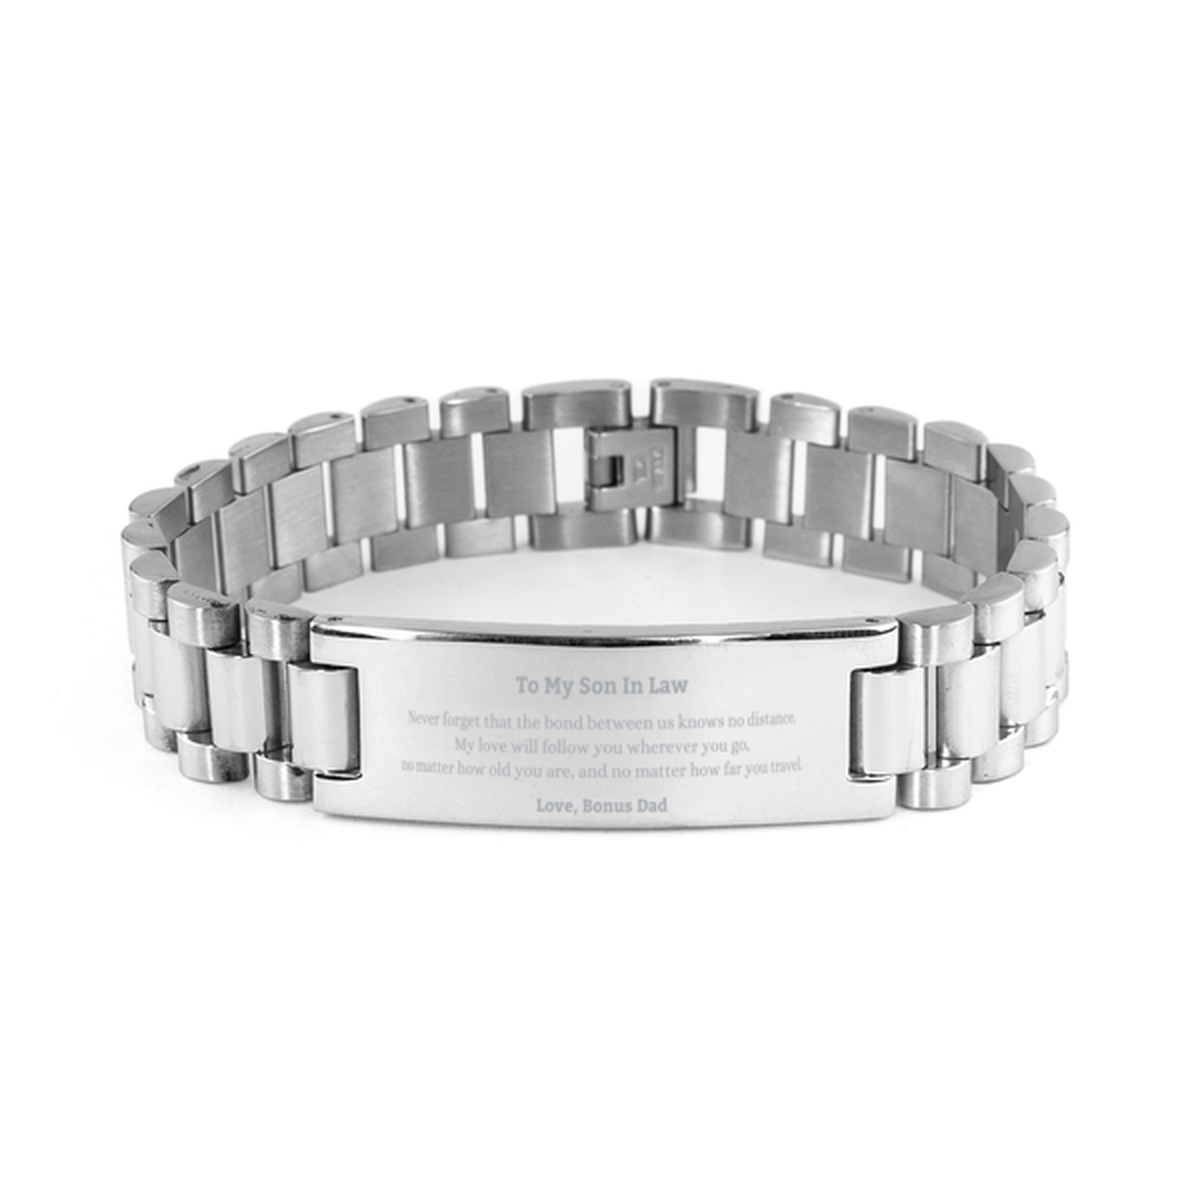 Son In Law Birthday Gifts from Bonus Dad, Adjustable Ladder Stainless Steel Bracelet for Son In Law Christmas Graduation Unique Gifts Son In Law Never forget that the bond between us knows no distance. Love, Bonus Dad